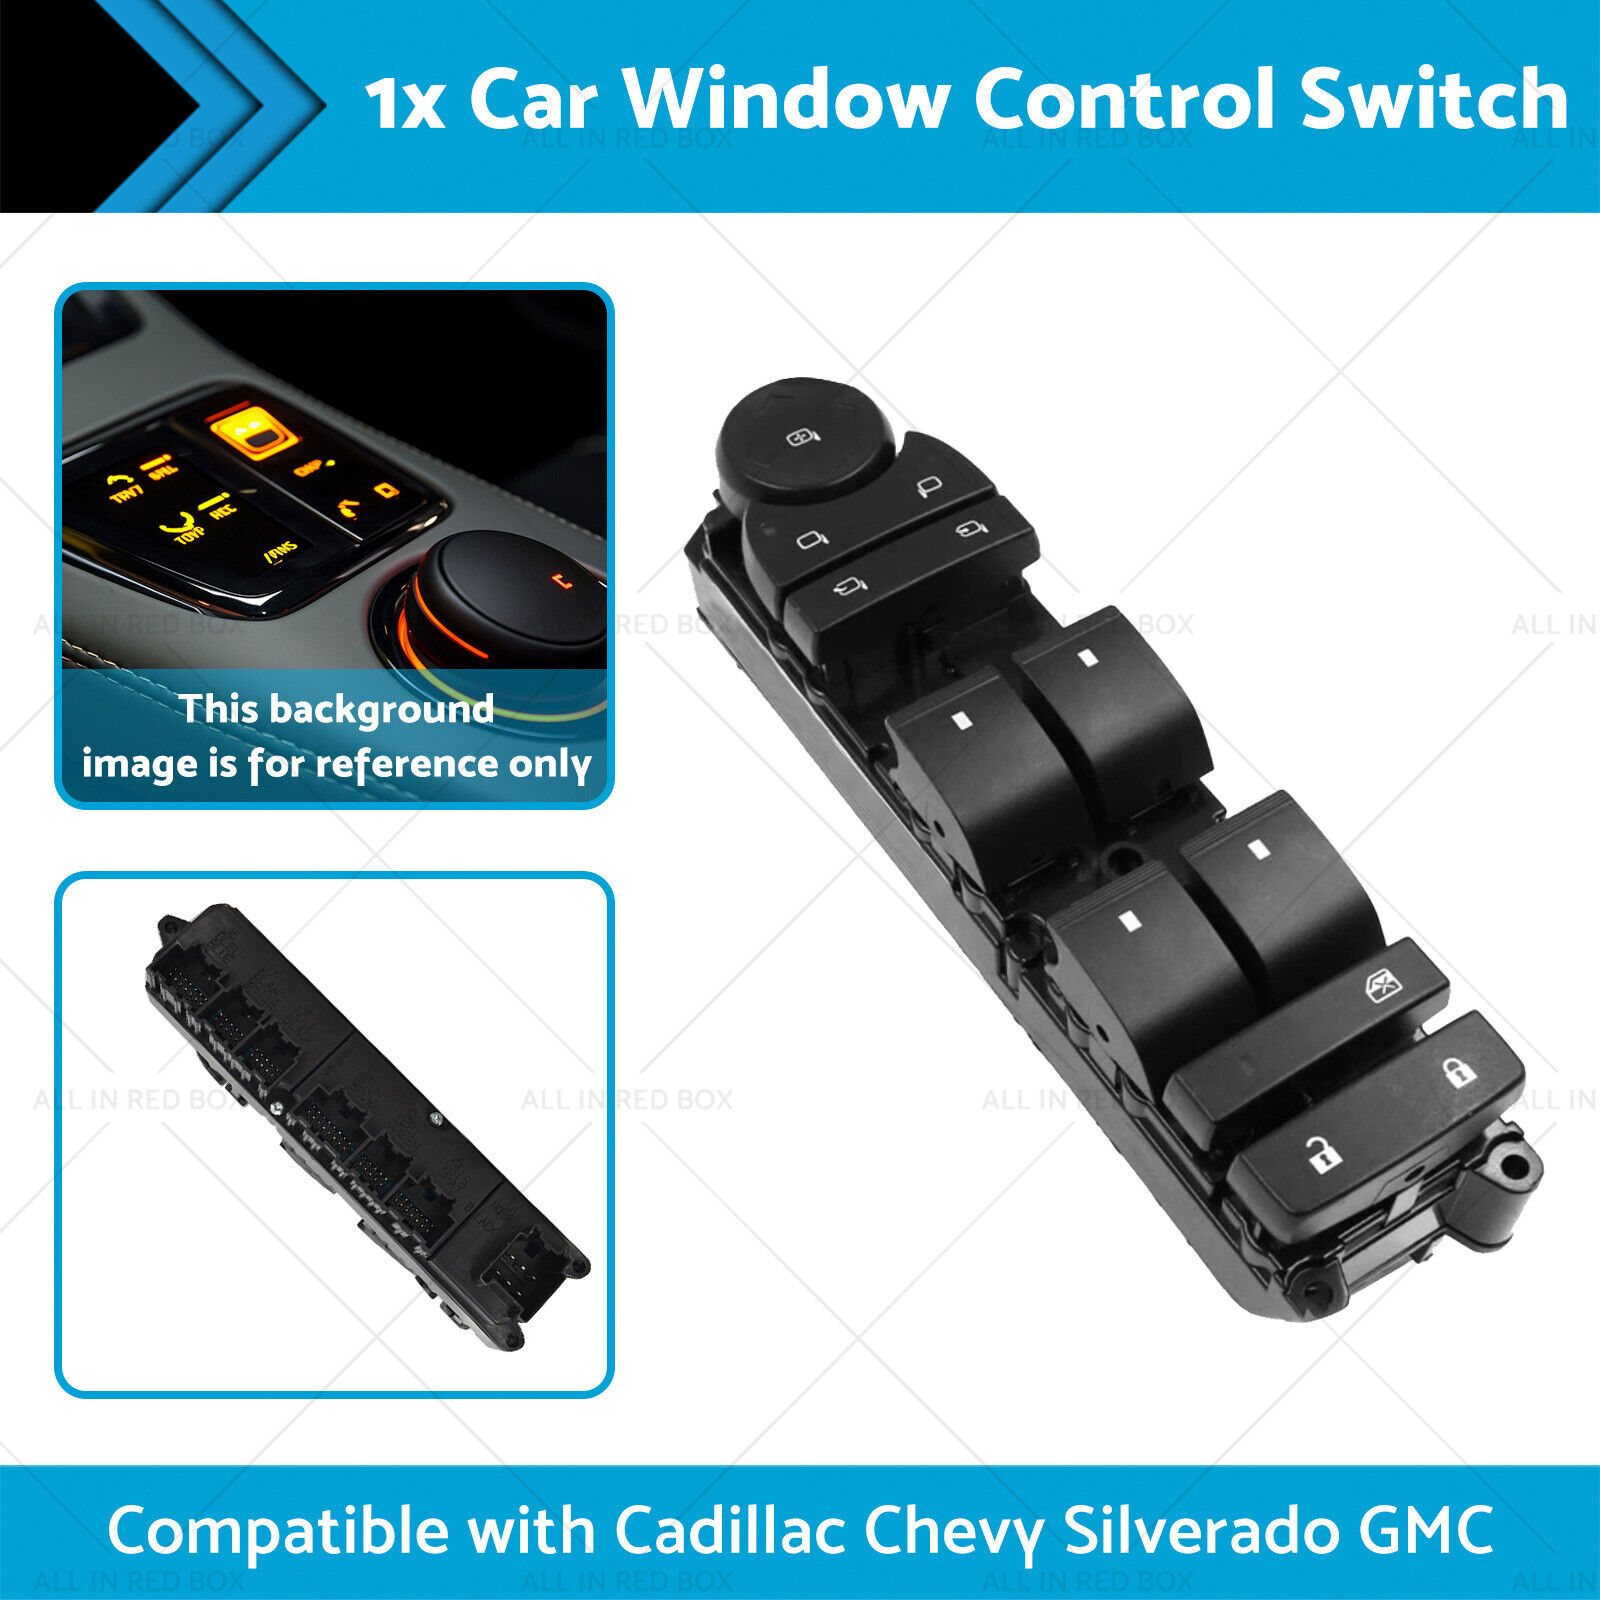 Car Window Control Switch Suitable For Driver Left Side Cadillac Chevy Silverado